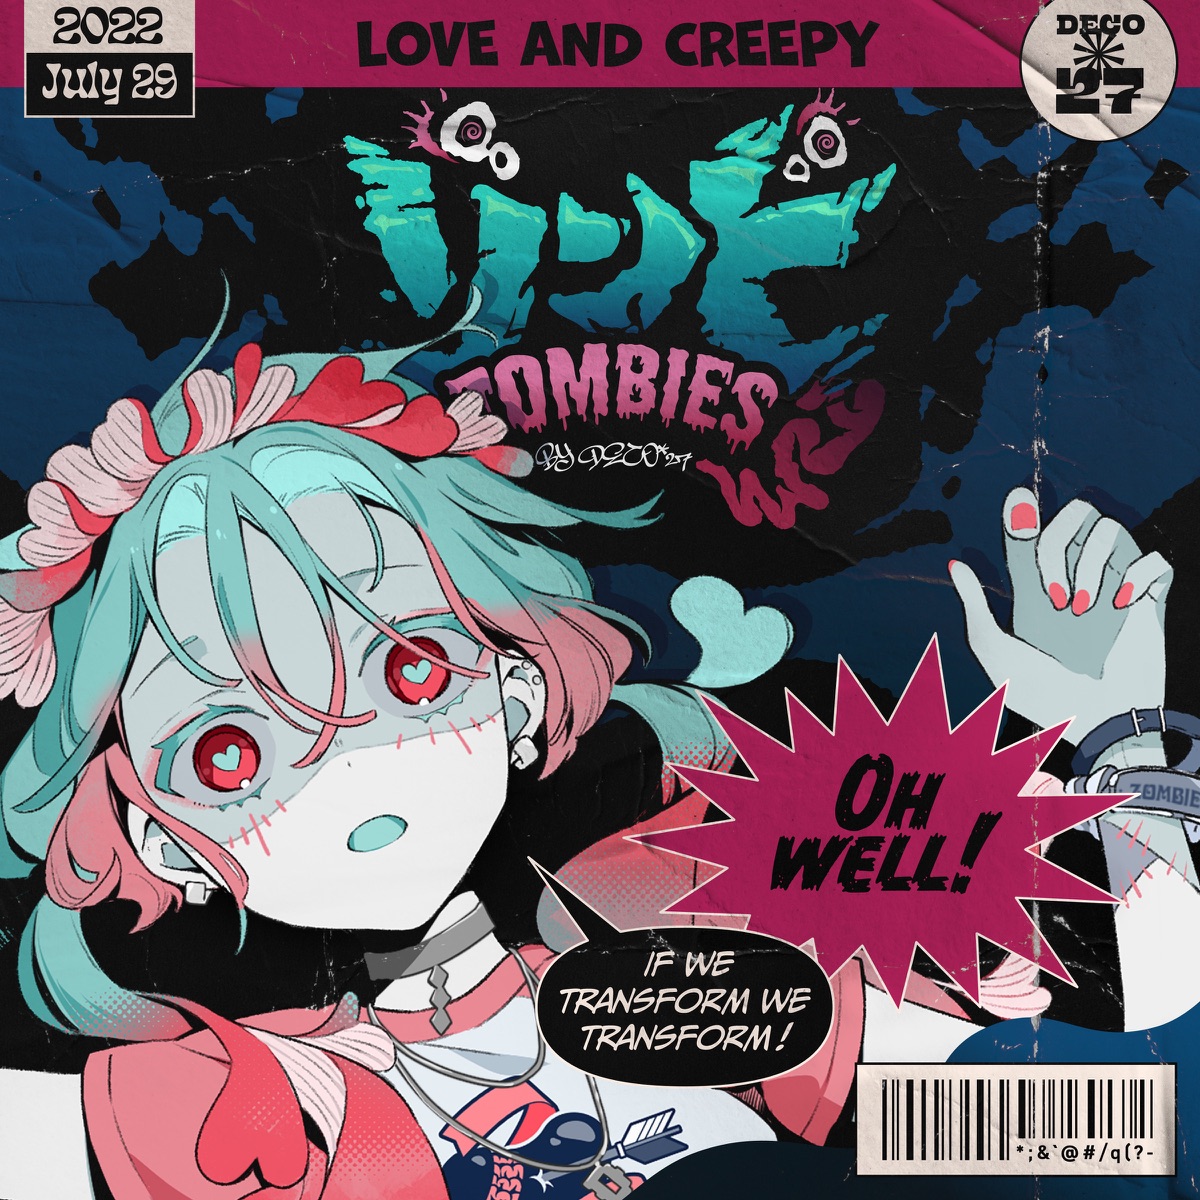 Cover art for『DECO*27 - ゾンビ』from the release『Zombies